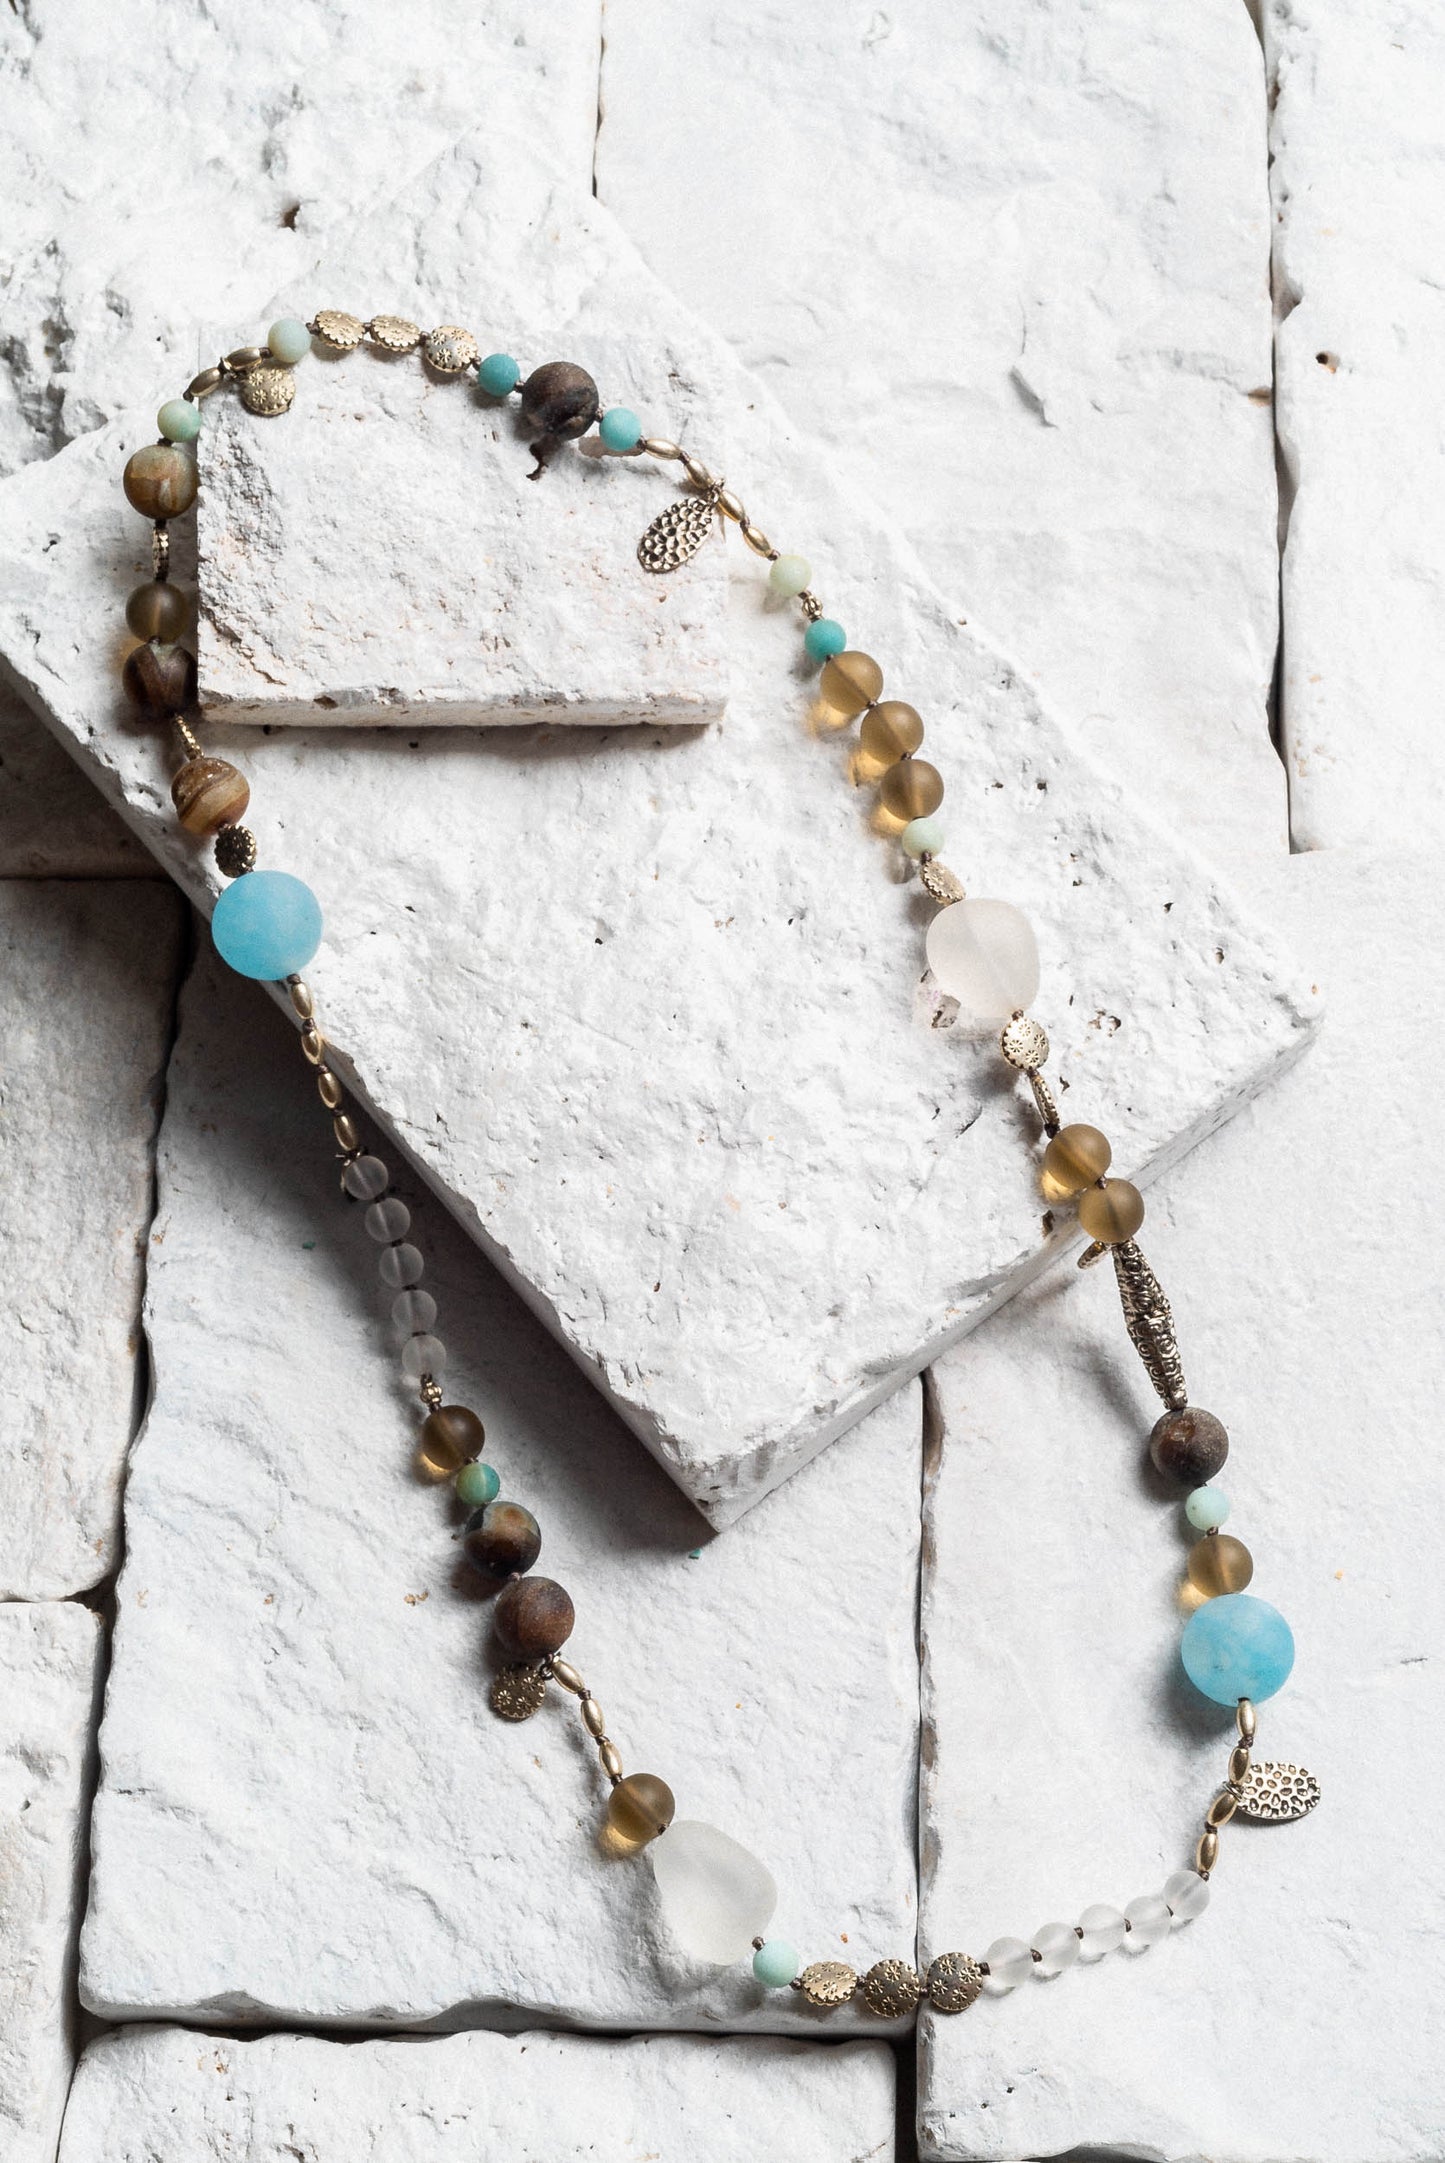 a long crystal beaded necklace. Featuring a variety of coloured and sized beads, brown, blue, grey, and white. Small silver leaf charms dotted around the necklace